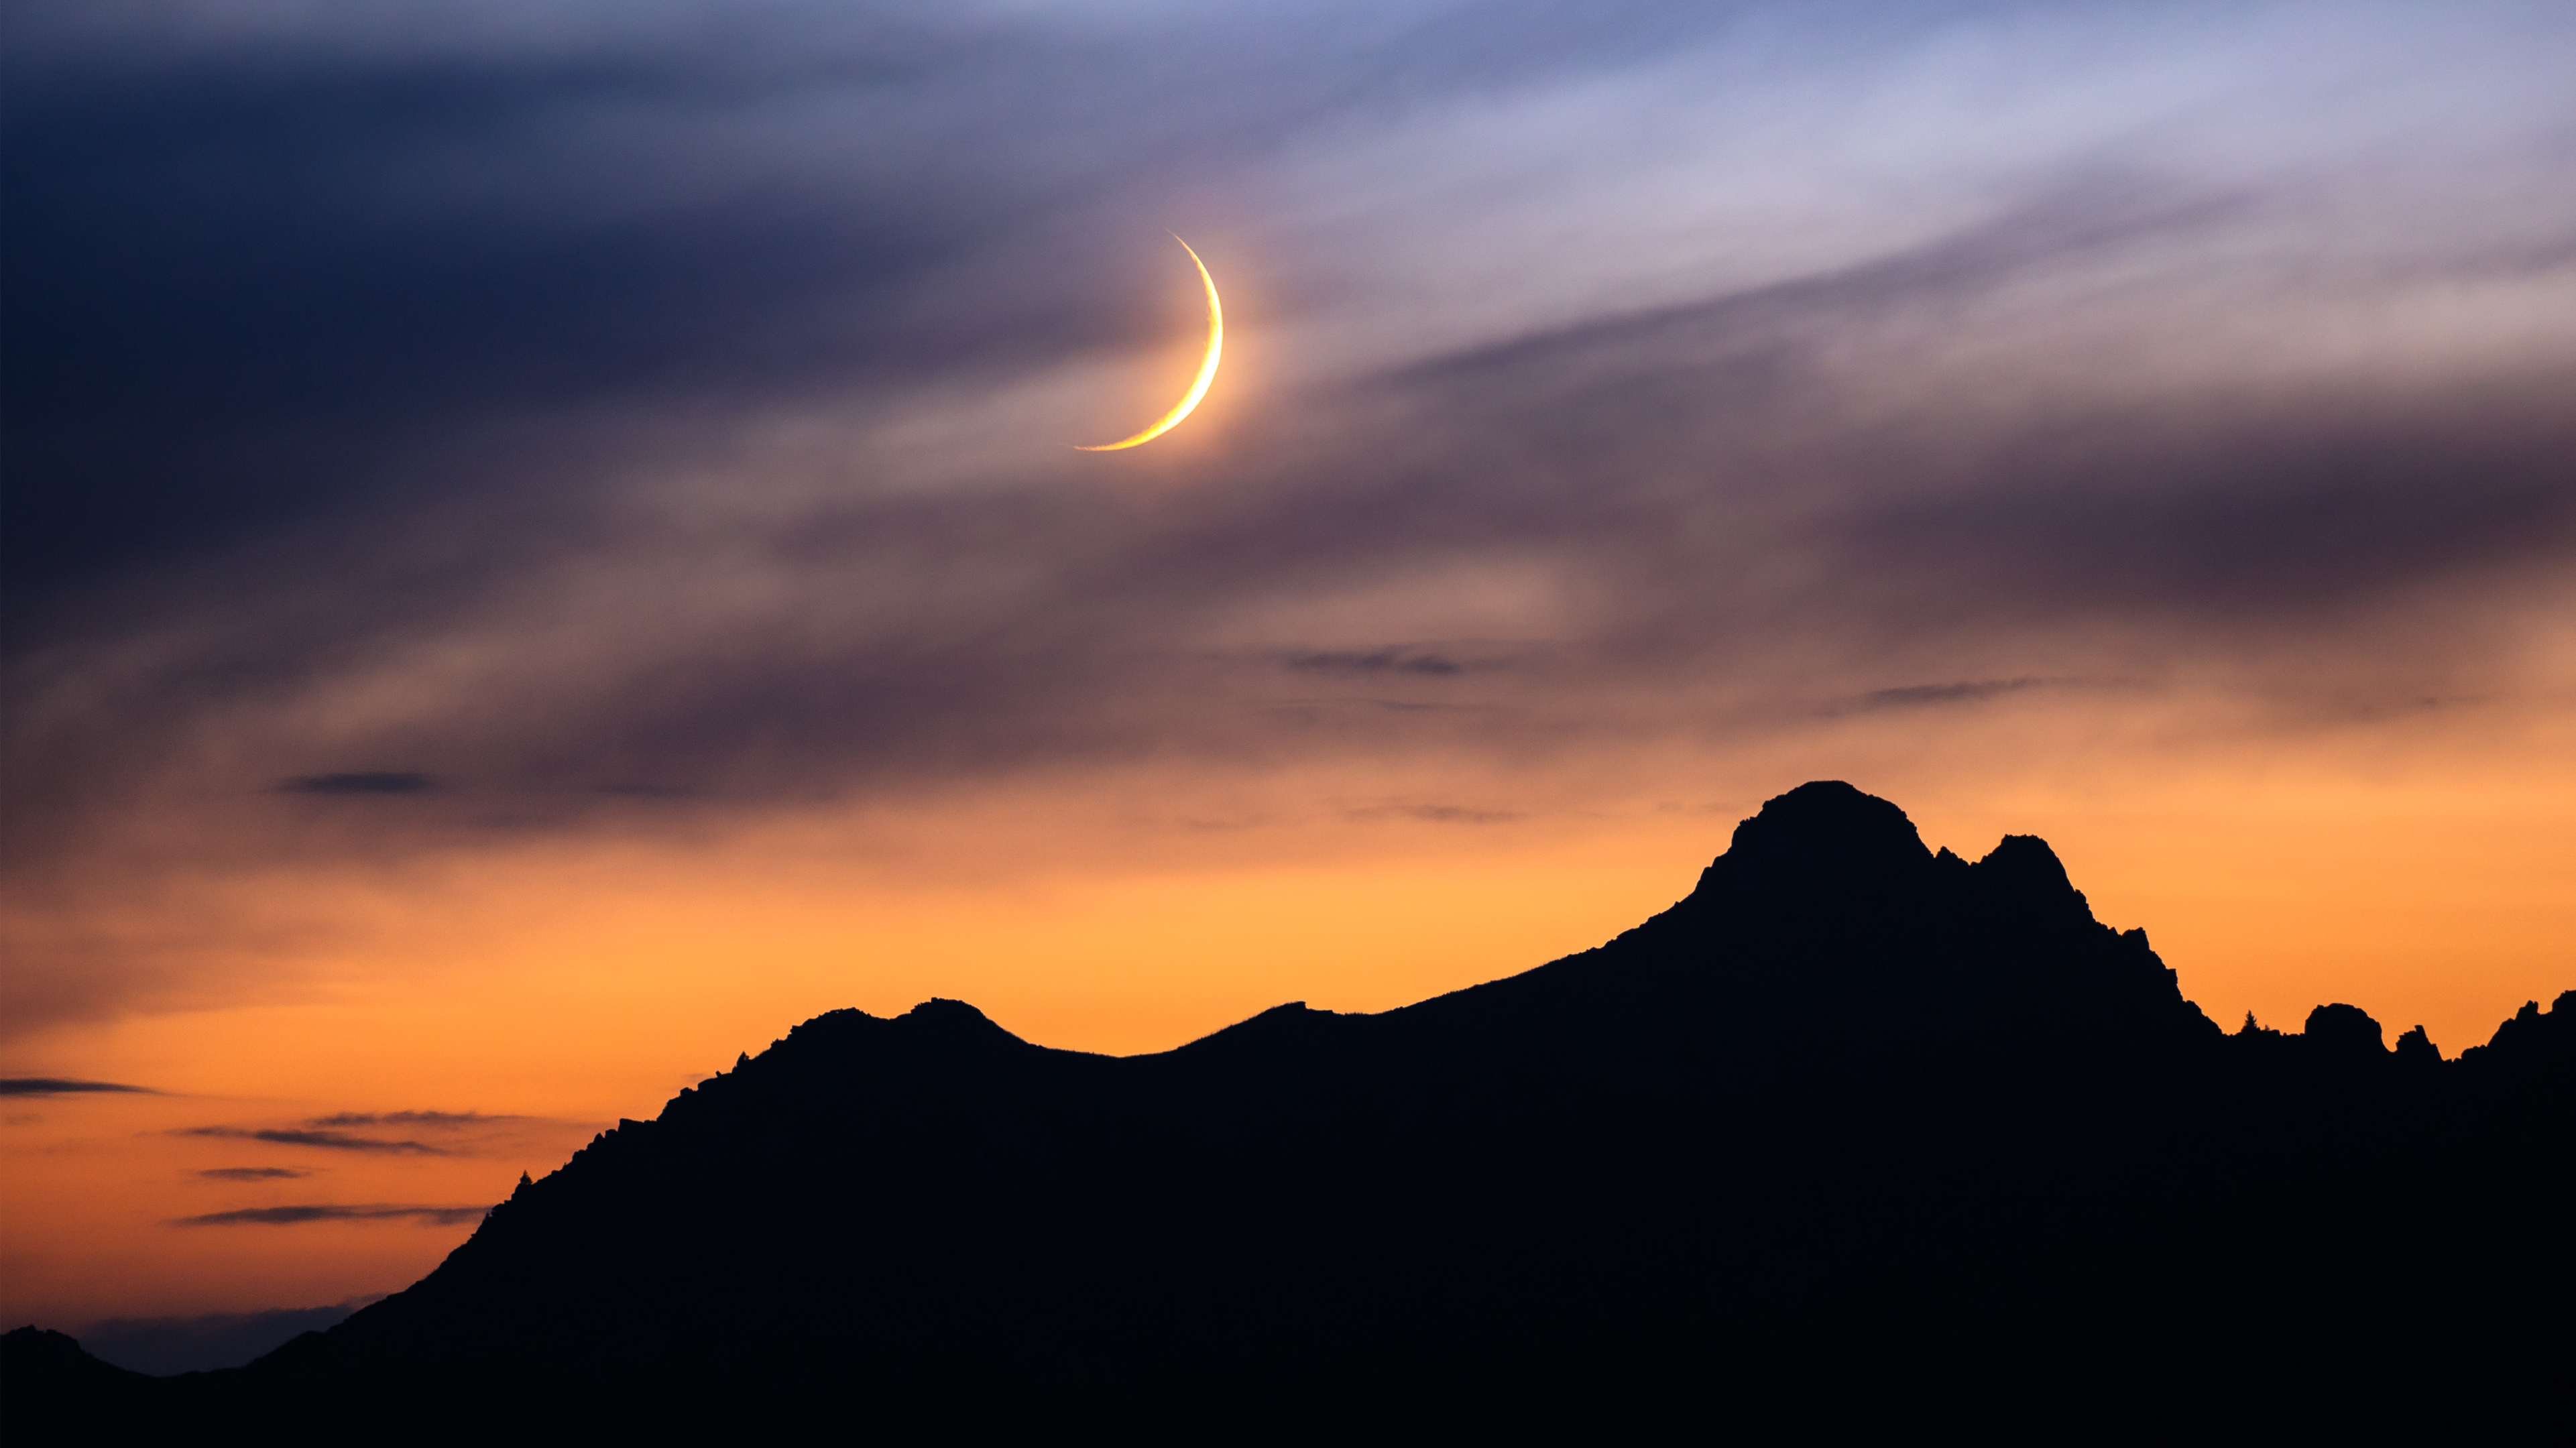 General 3842x2160 photography landscape sunset mountains nature clouds Moon shadow sky silhouette 4K sunset glow crescent moon